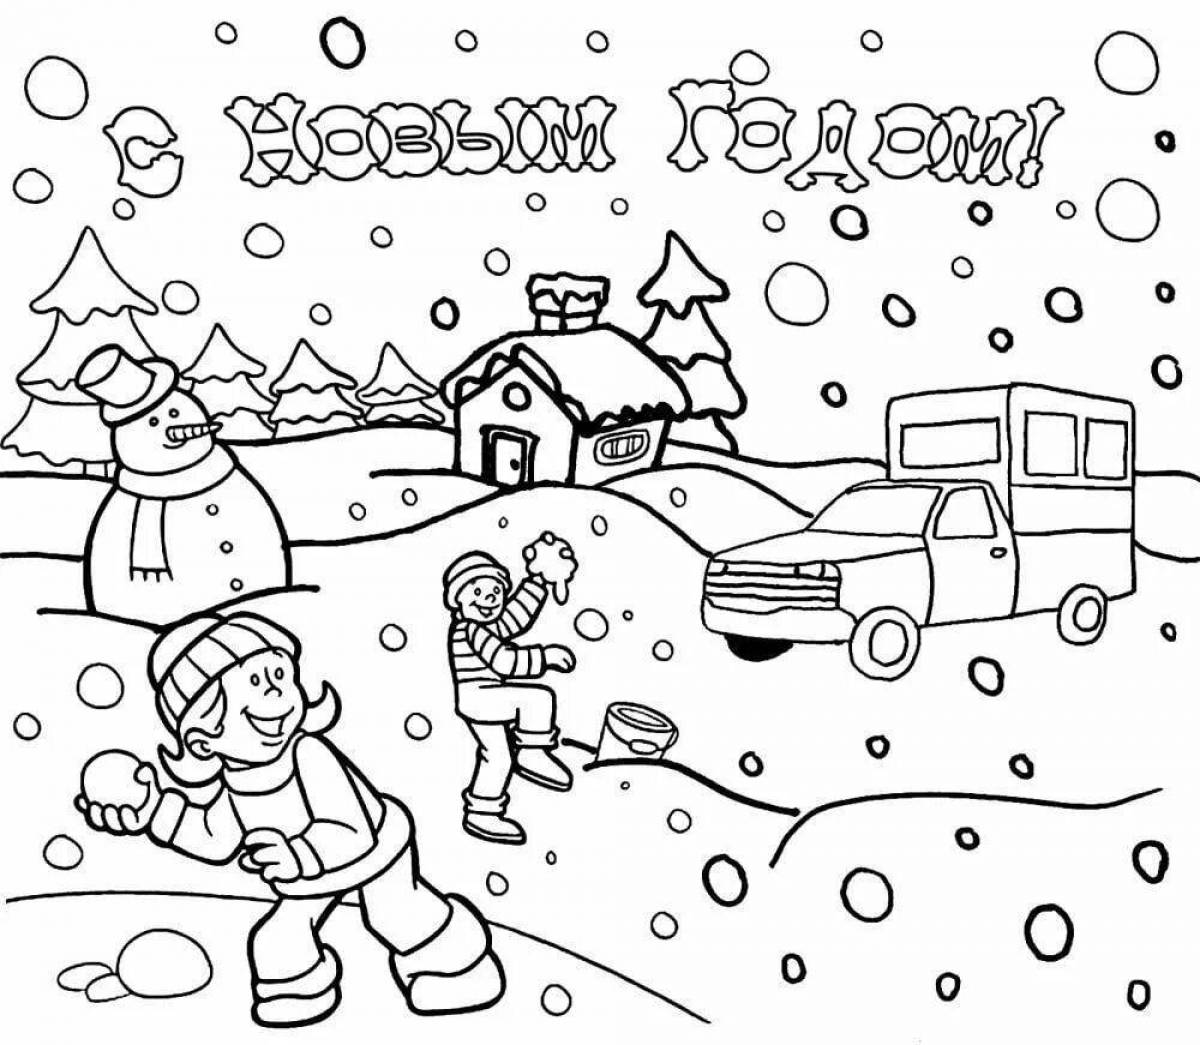 Refreshing Christmas coloring book for kids 6-7 years old